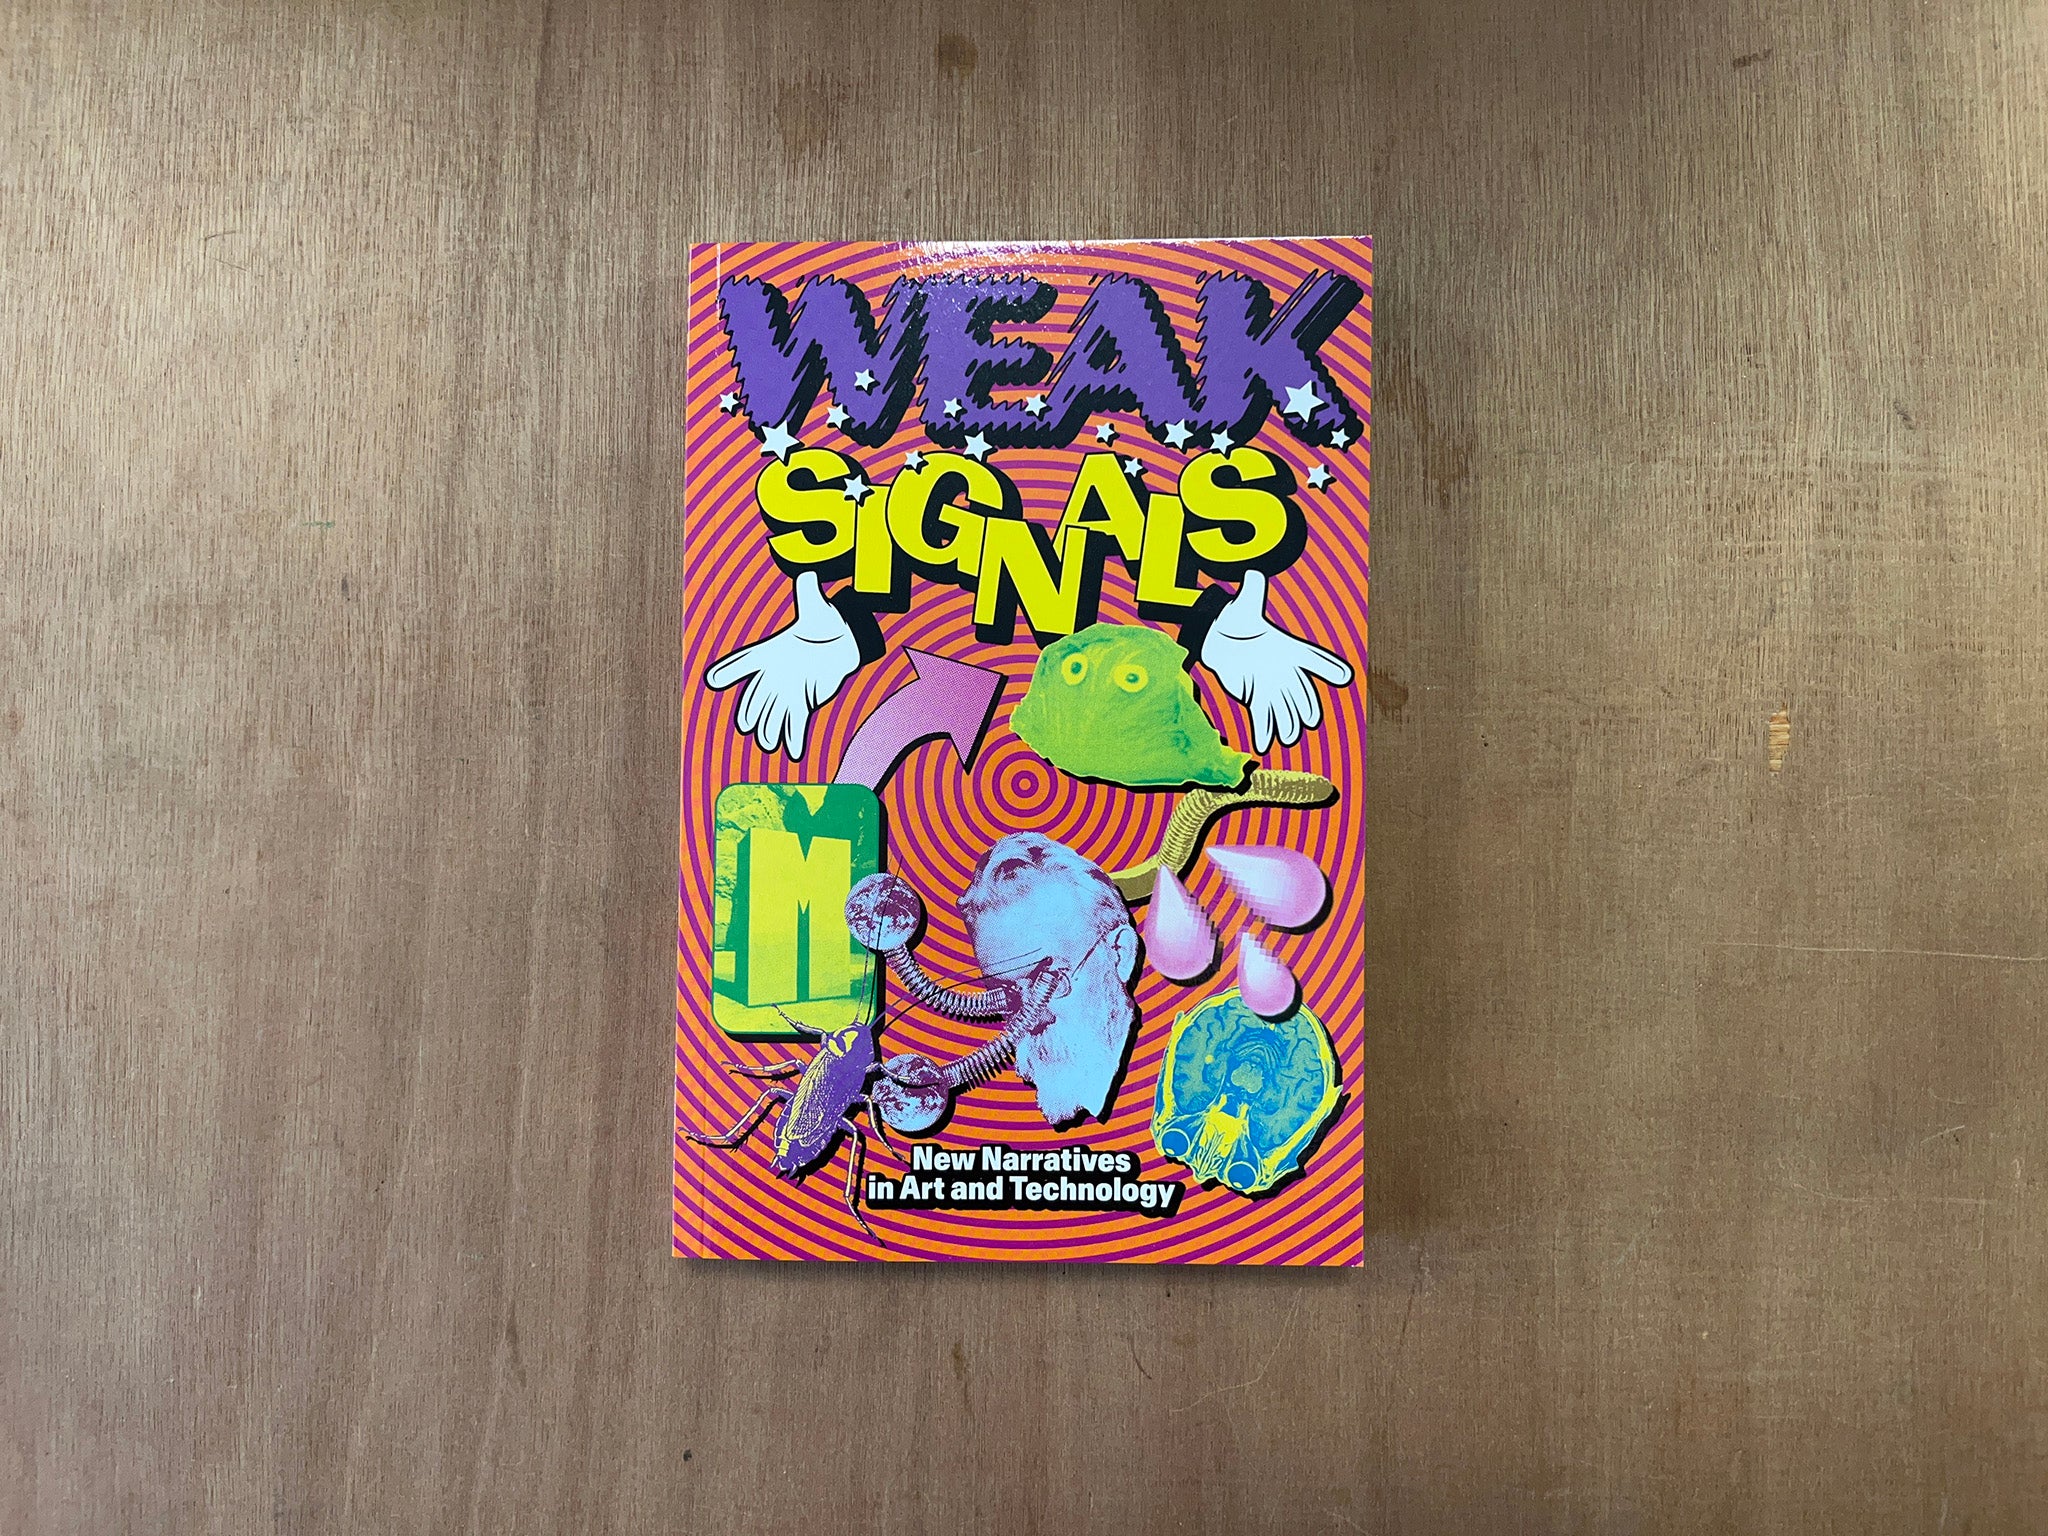 WEAK SIGNALS: NEW NARRATIVES IN ART AND TECHNOLOGY Ed. by Lukas Feireiss & Florian Hadler